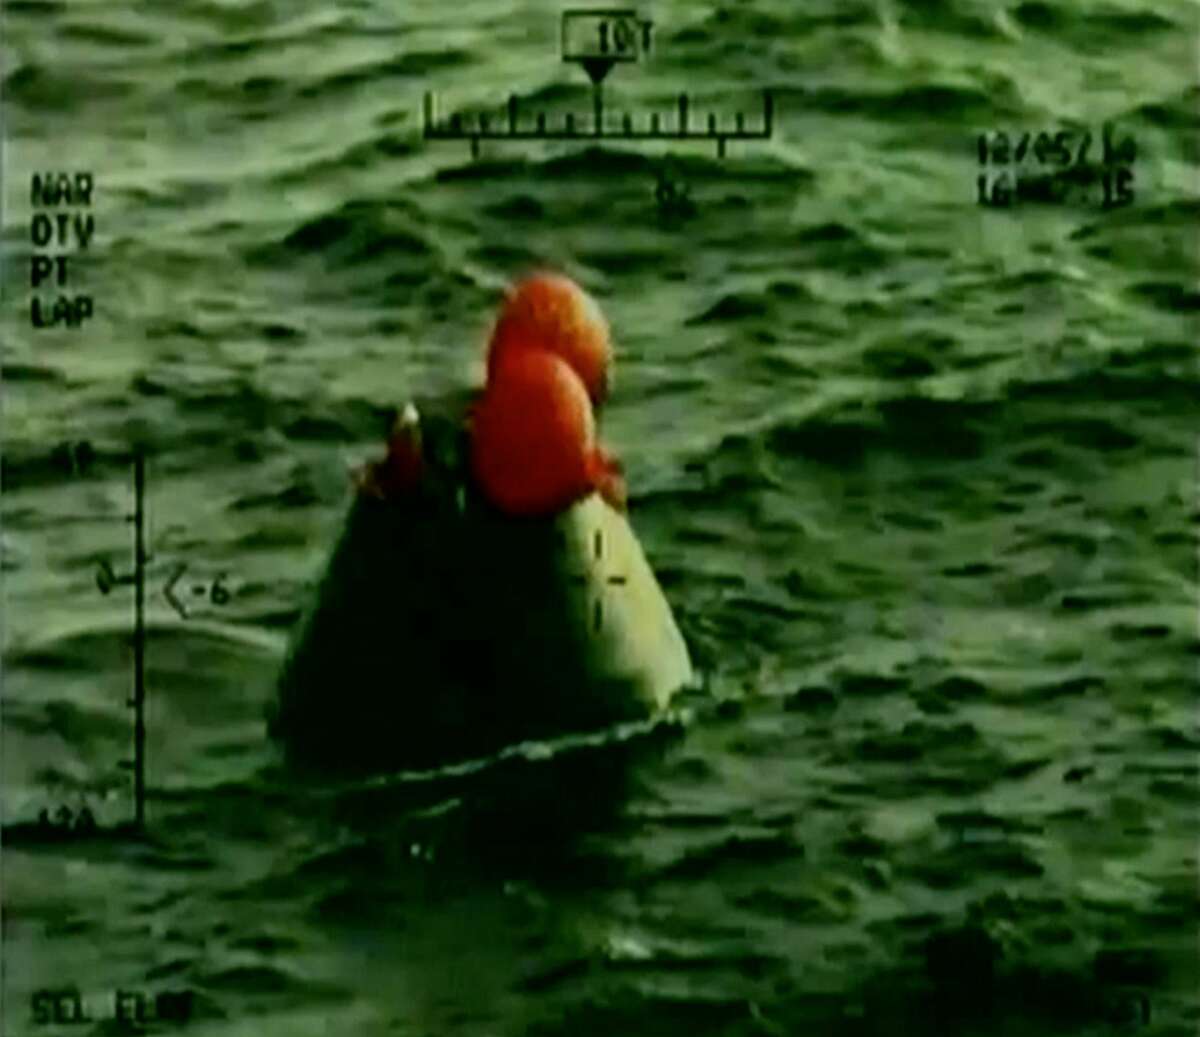 In this frame grab from NASA-TV, the Orion capsule floats after splashing down in the Pacific Ocean, Friday, Dec. 5, 2014, following a dramatic test flight that took it to a zenith height of 3,600 miles and ushered in a new era of human exploration aiming for Mars. (AP Photo/NASA)